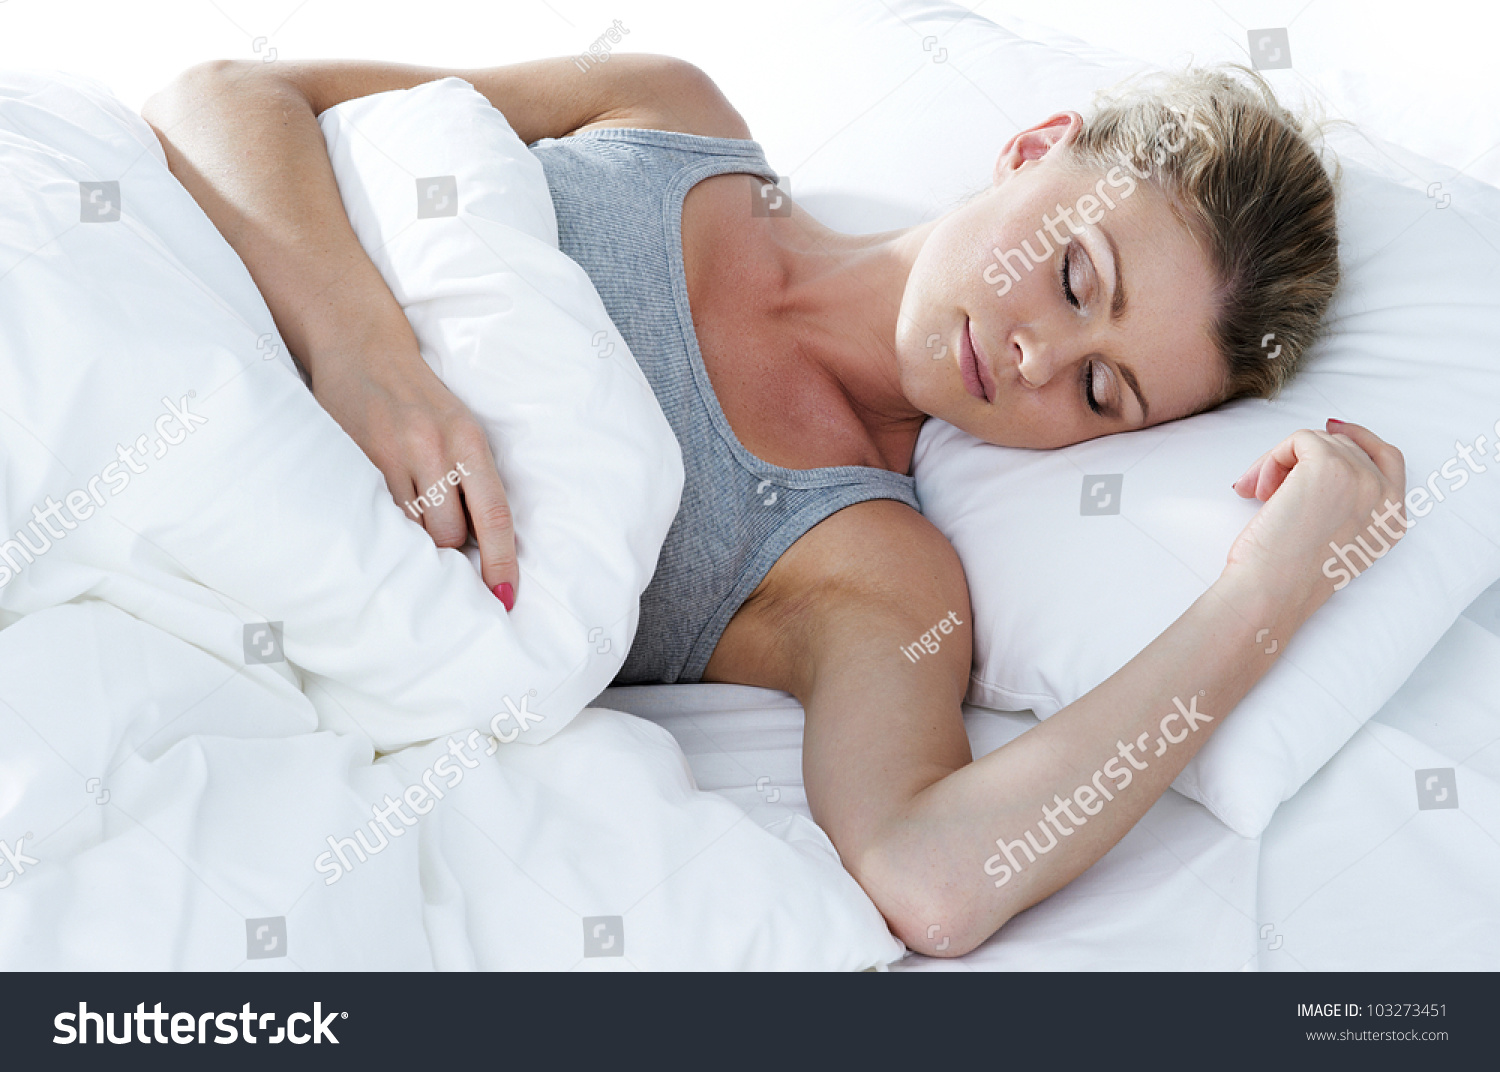 Closeup portrait of a cute young woman sleeping on the bed #103273451